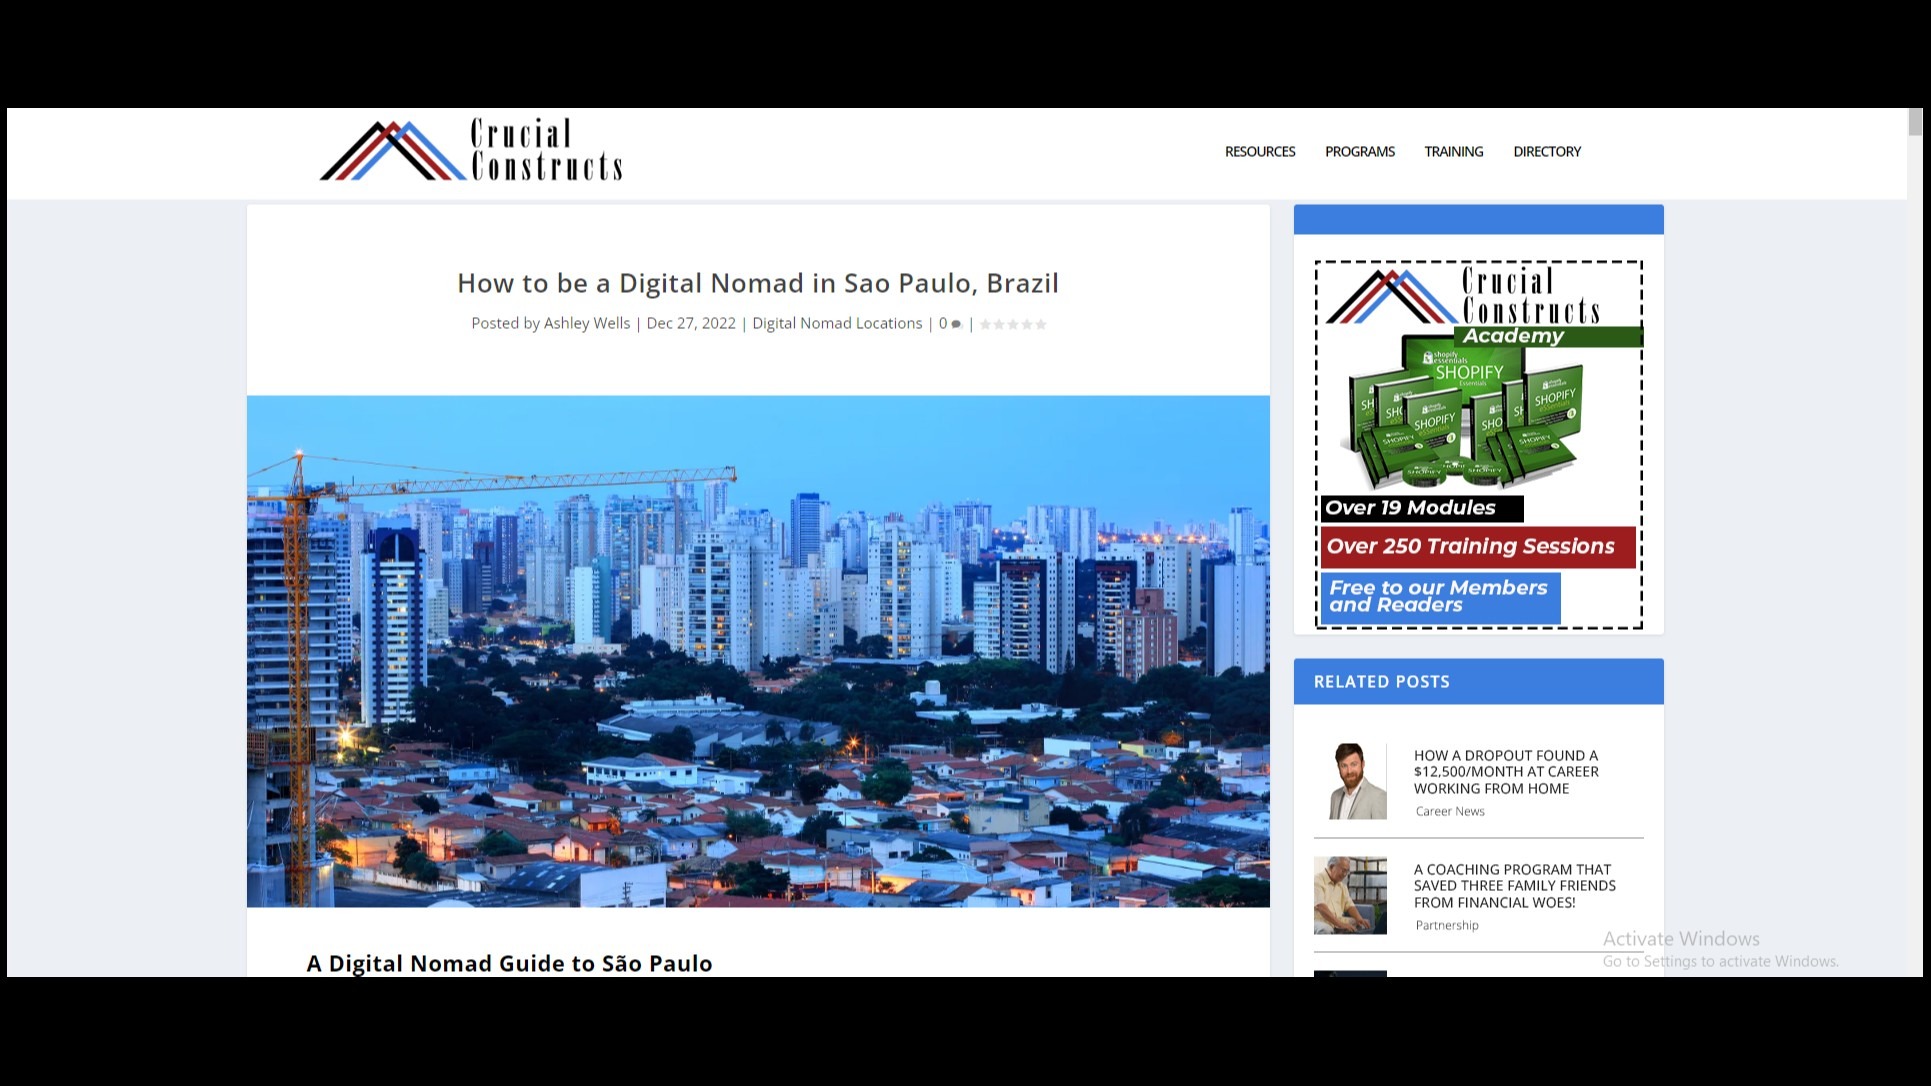 Find Accommodation & Co-Working Spaces In Sao Paulo With This Freelancer Guide